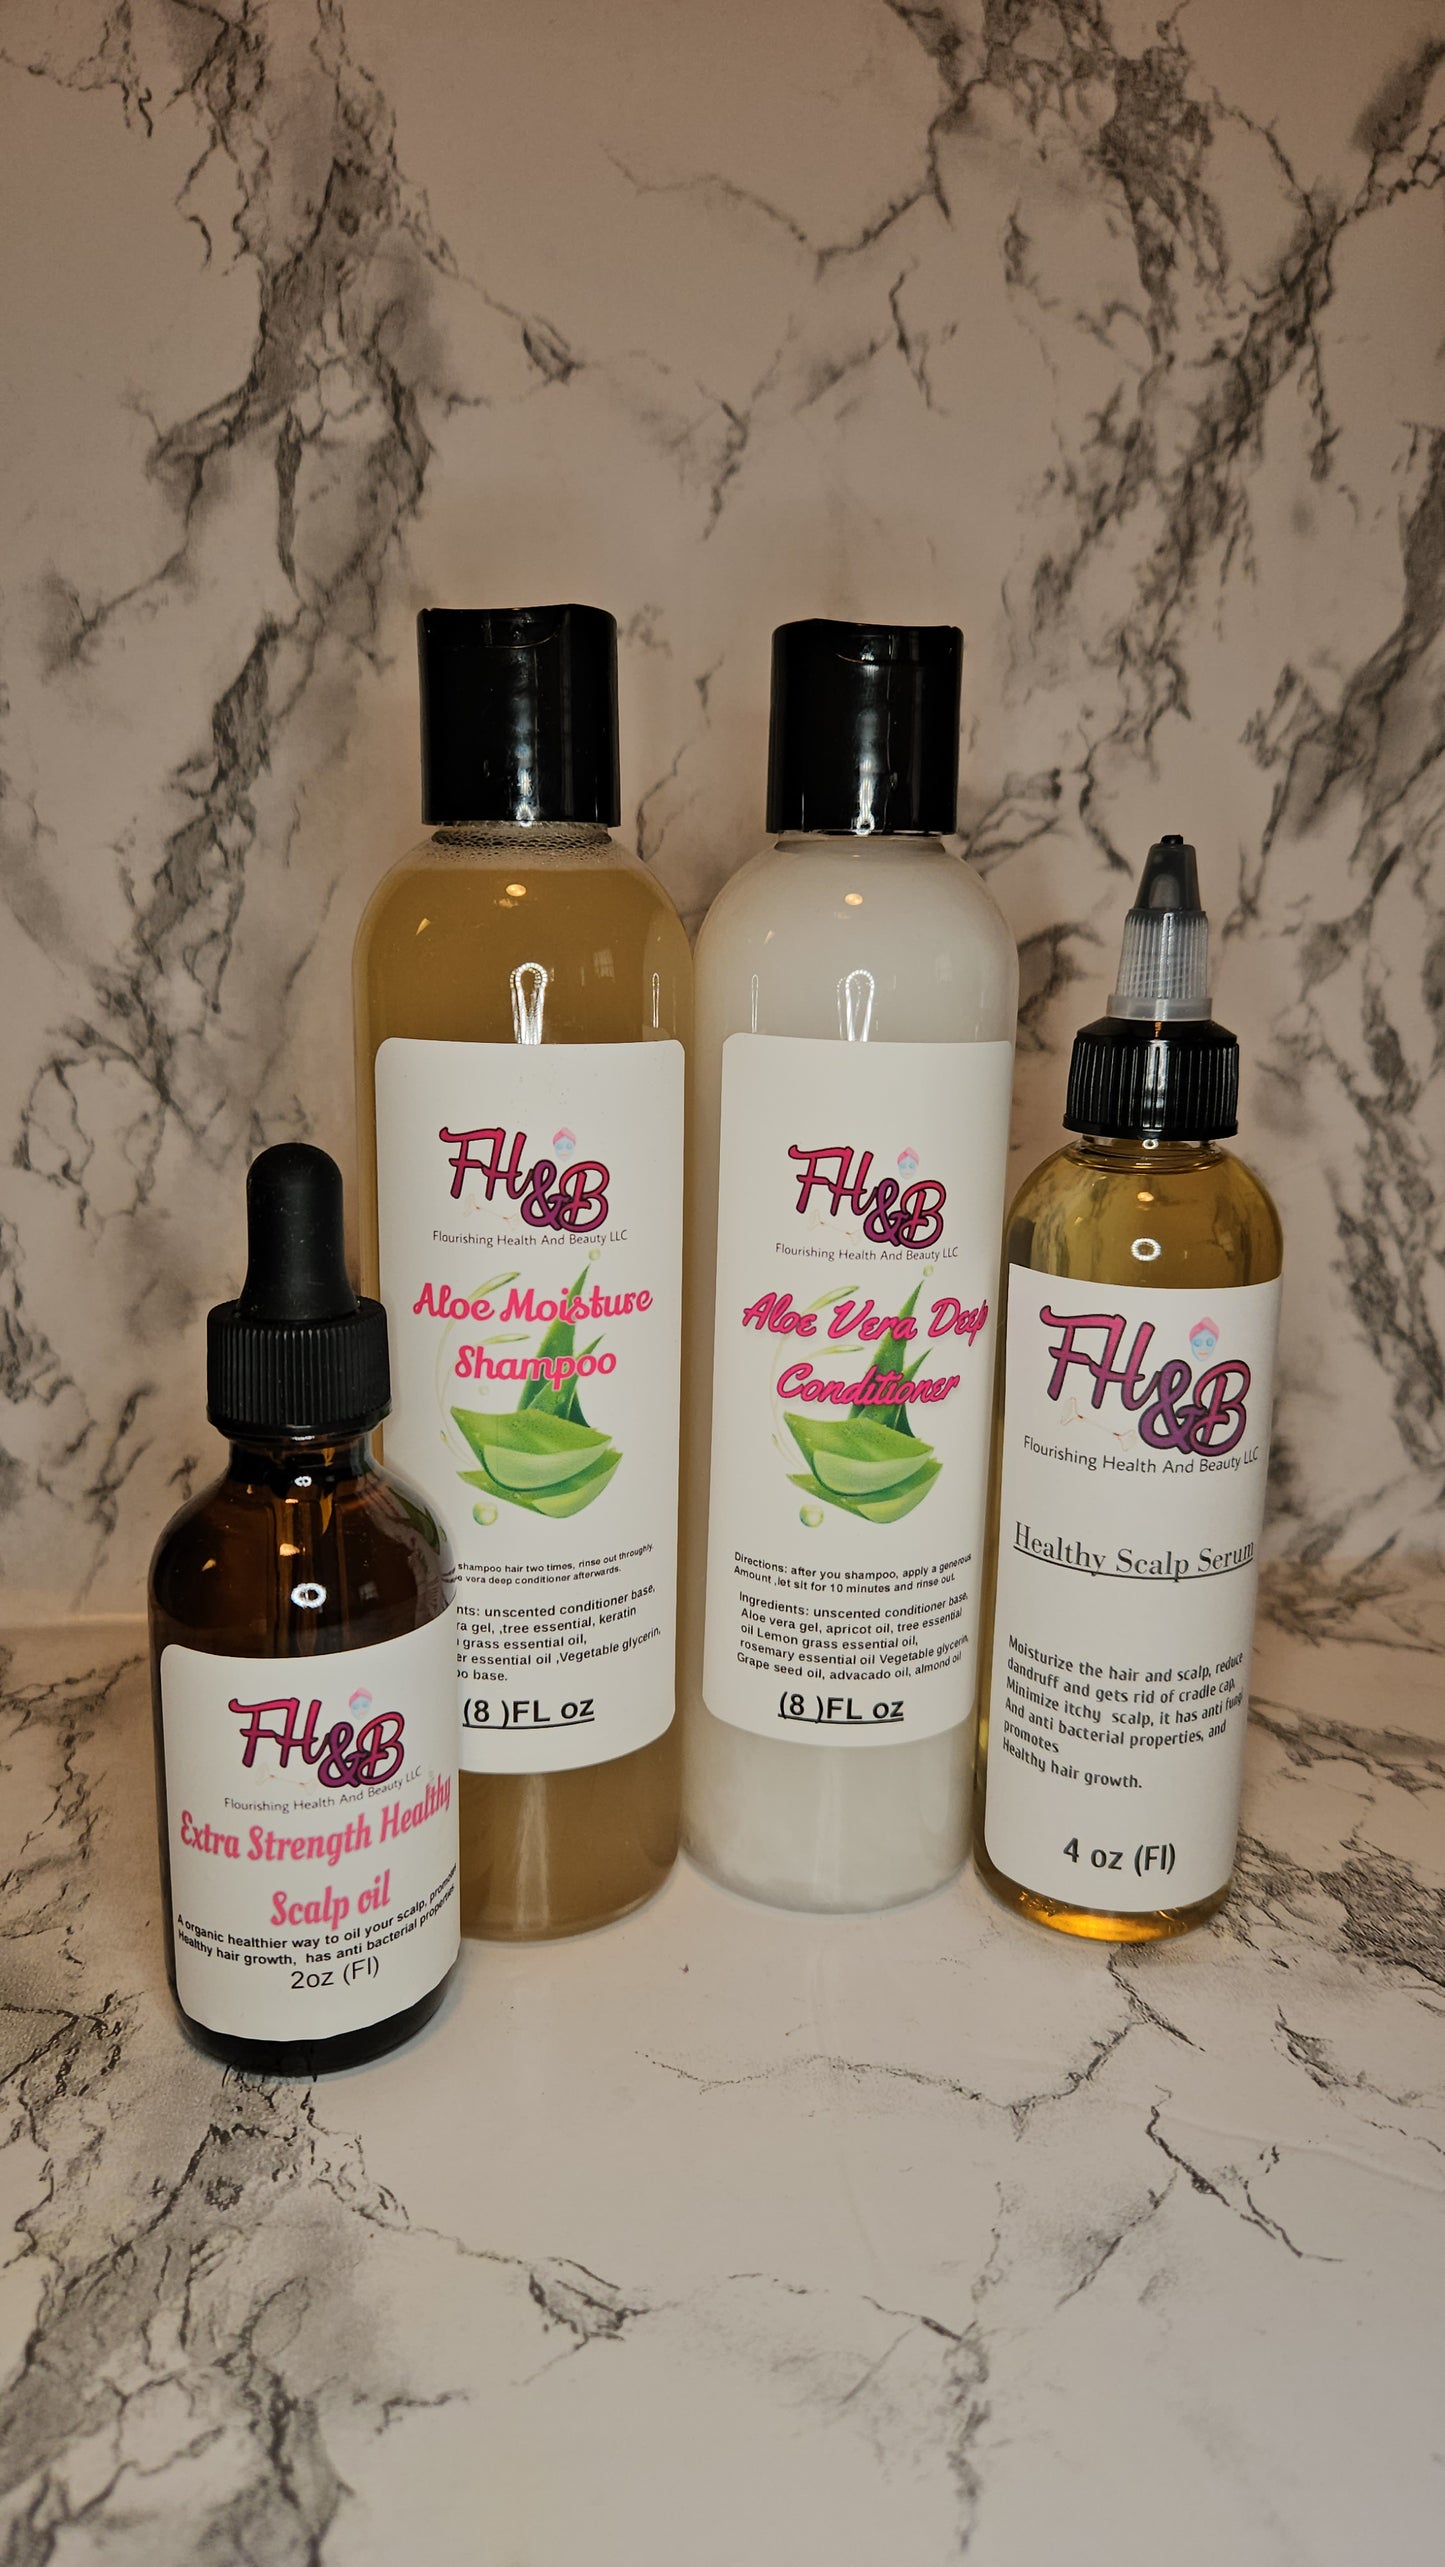 Hair care / growth products